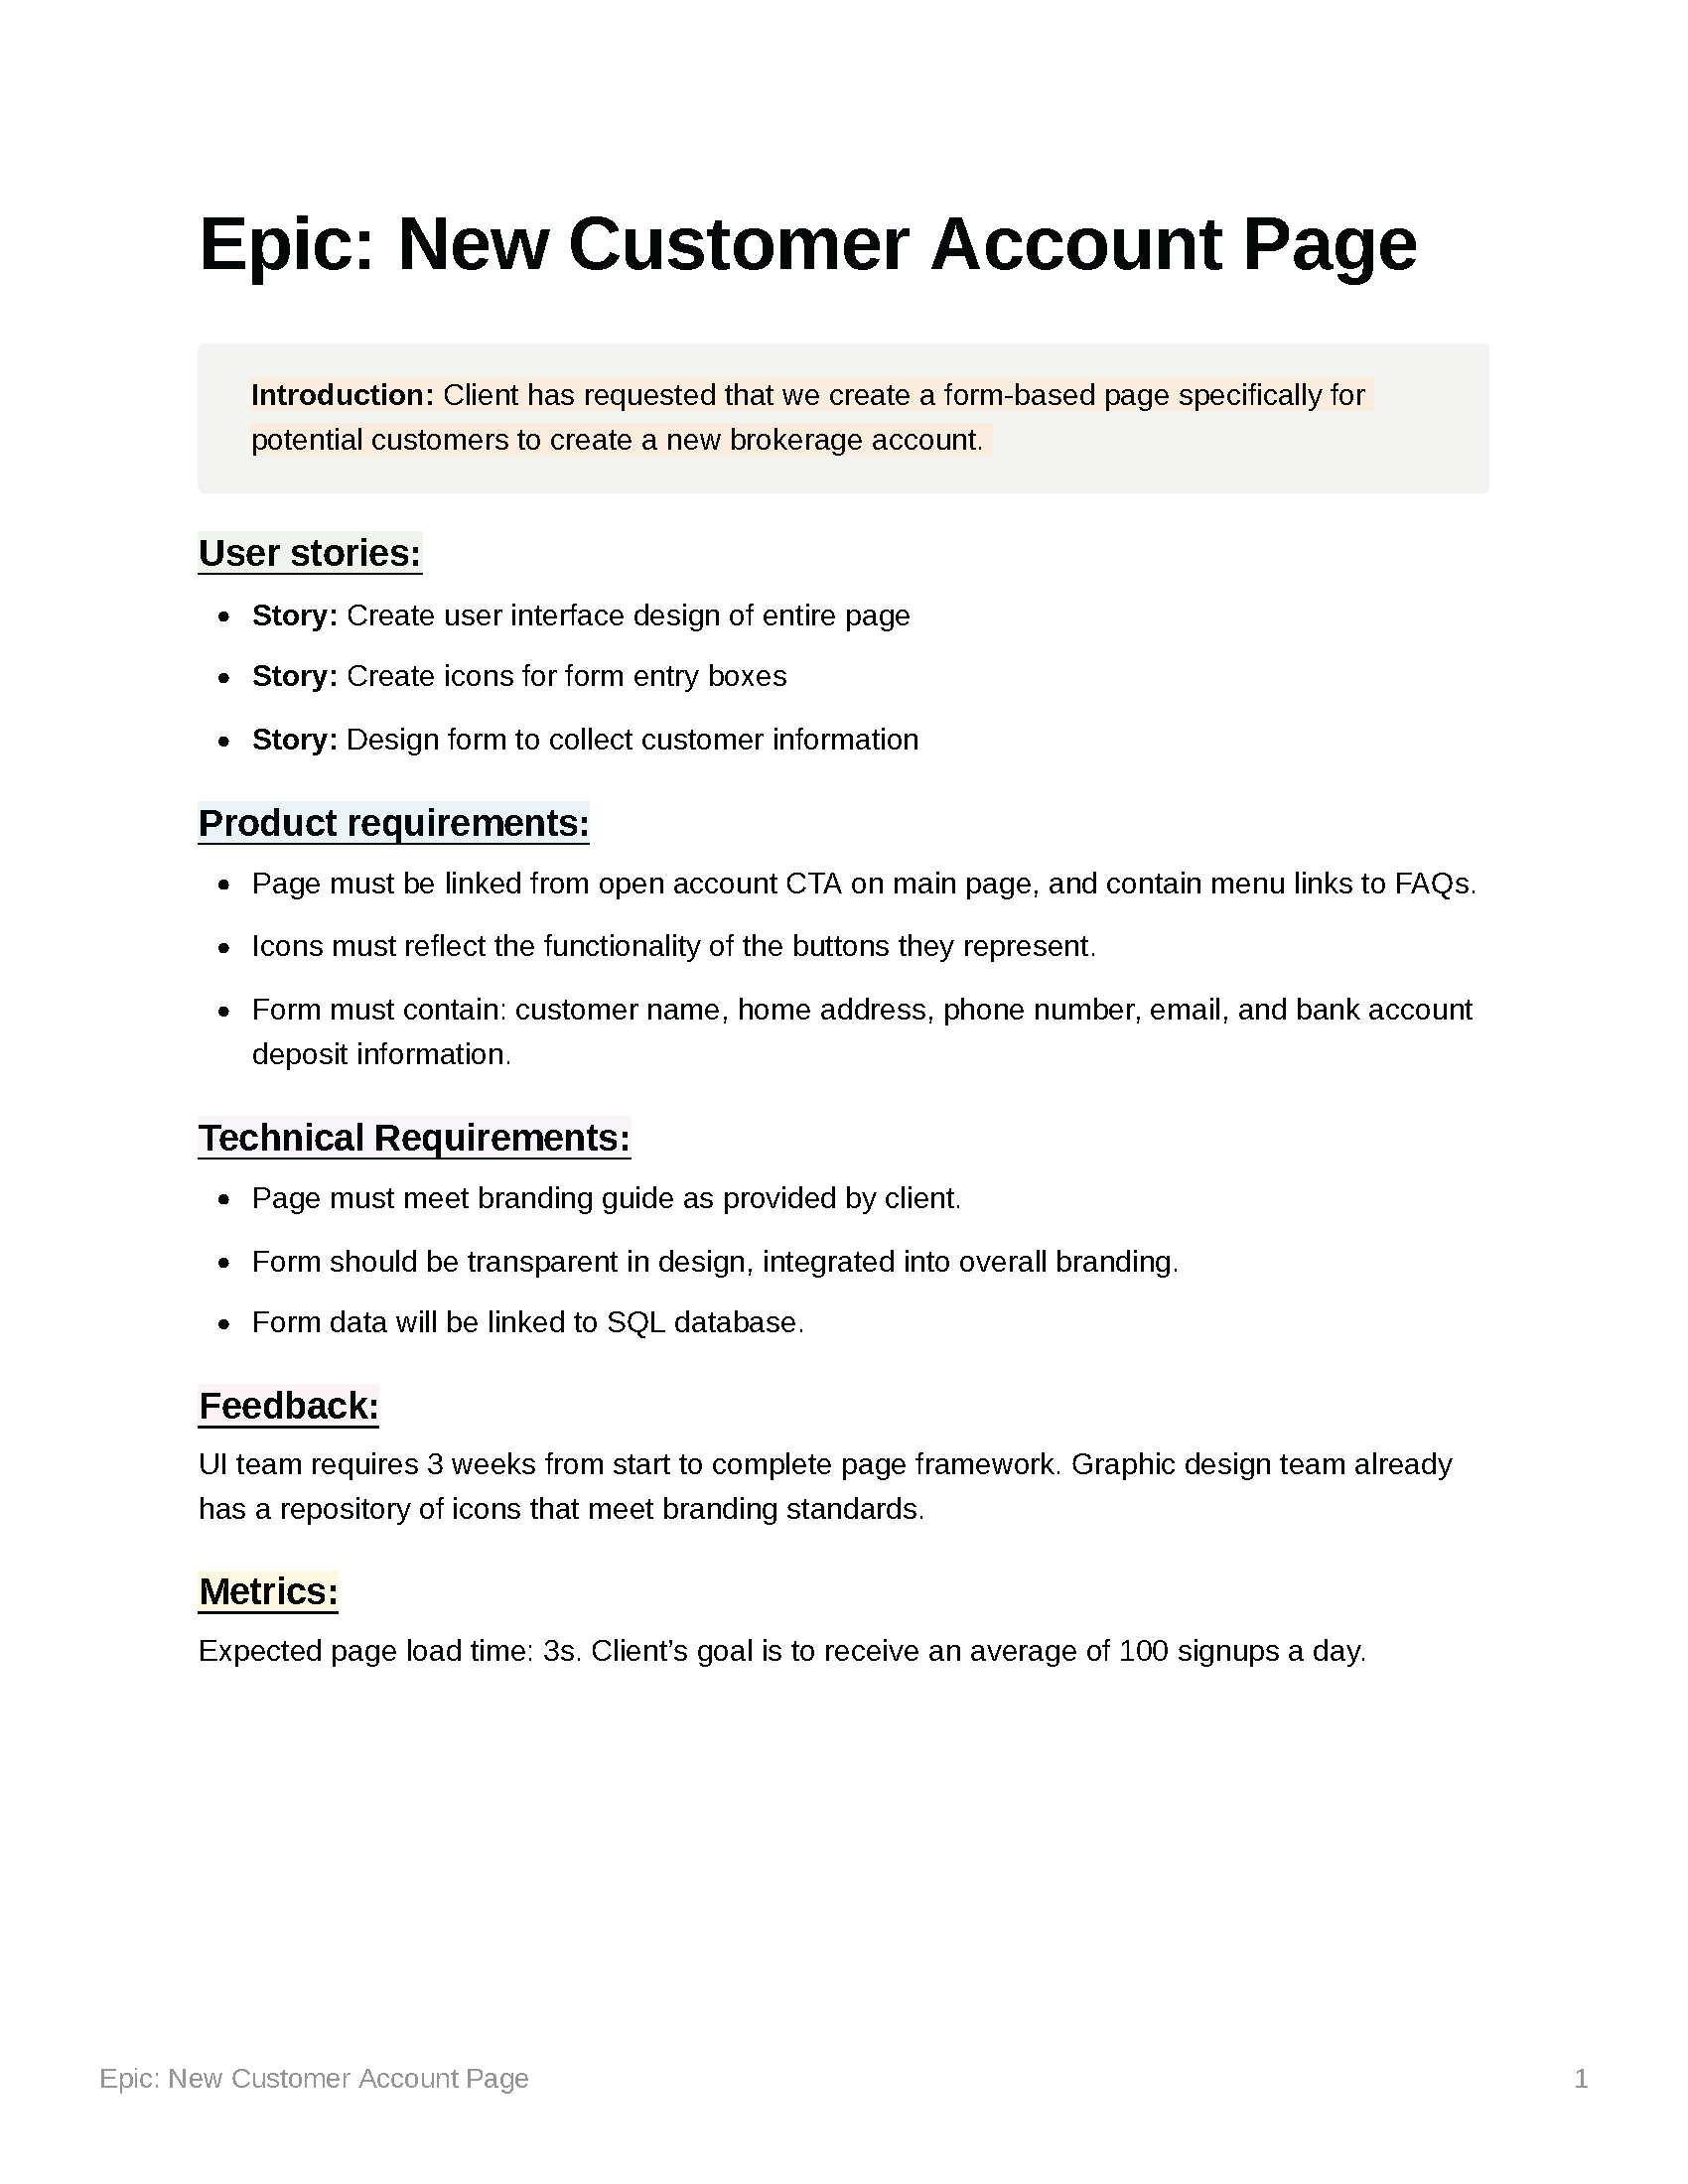 epic new customer account page